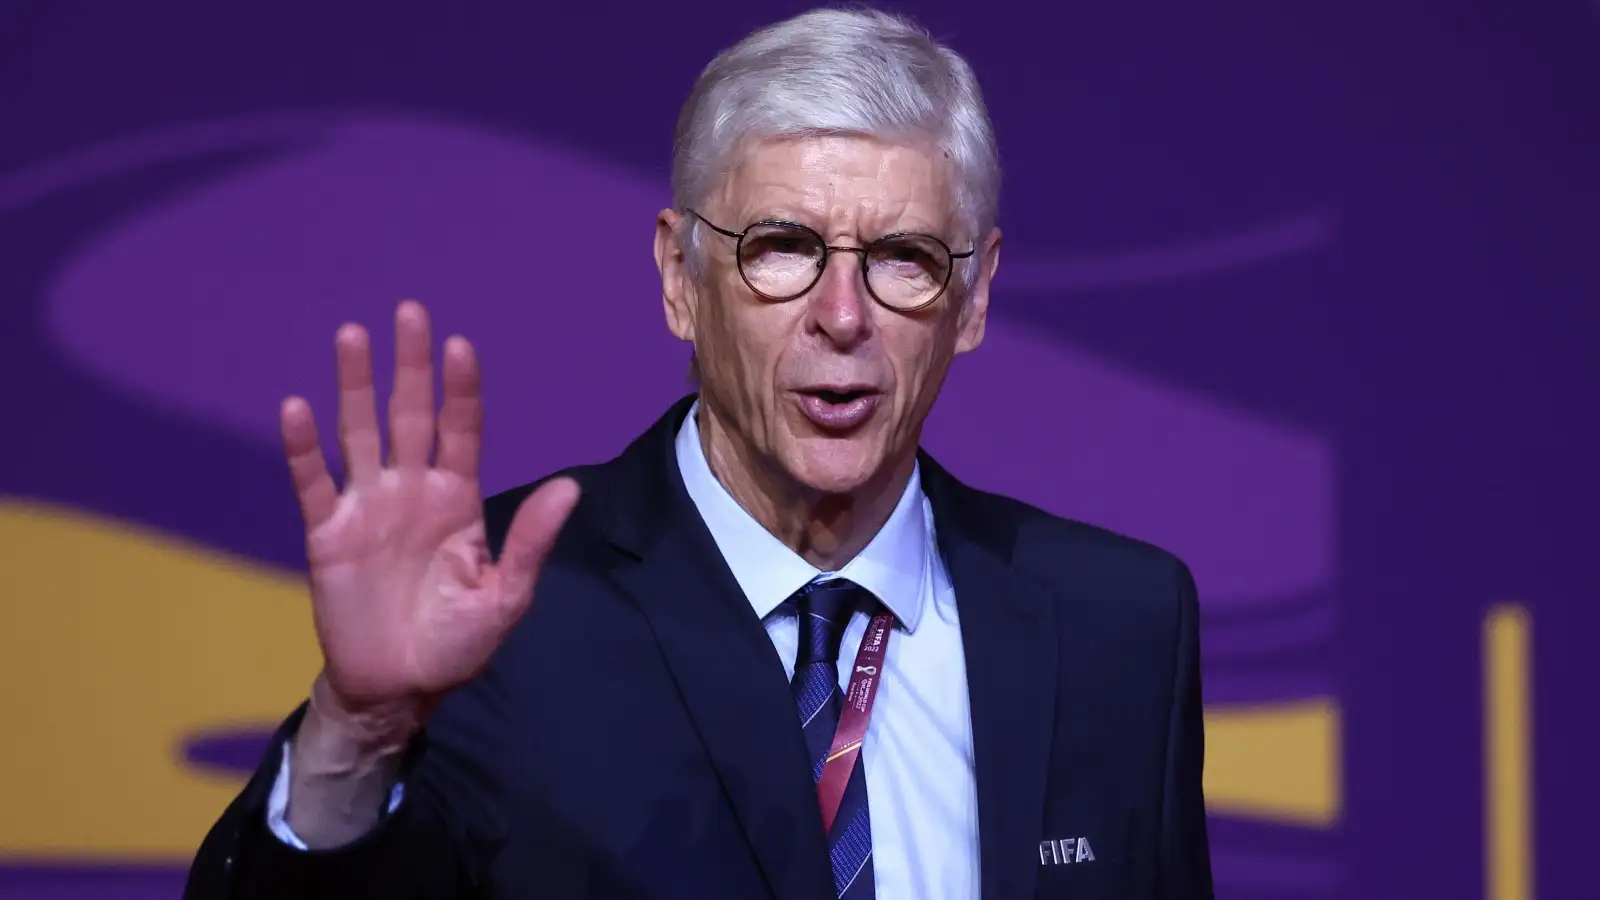 ‘Brainwashed’ Arsene Wenger ‘making most stupid statements’ at World Cup says Norway boss